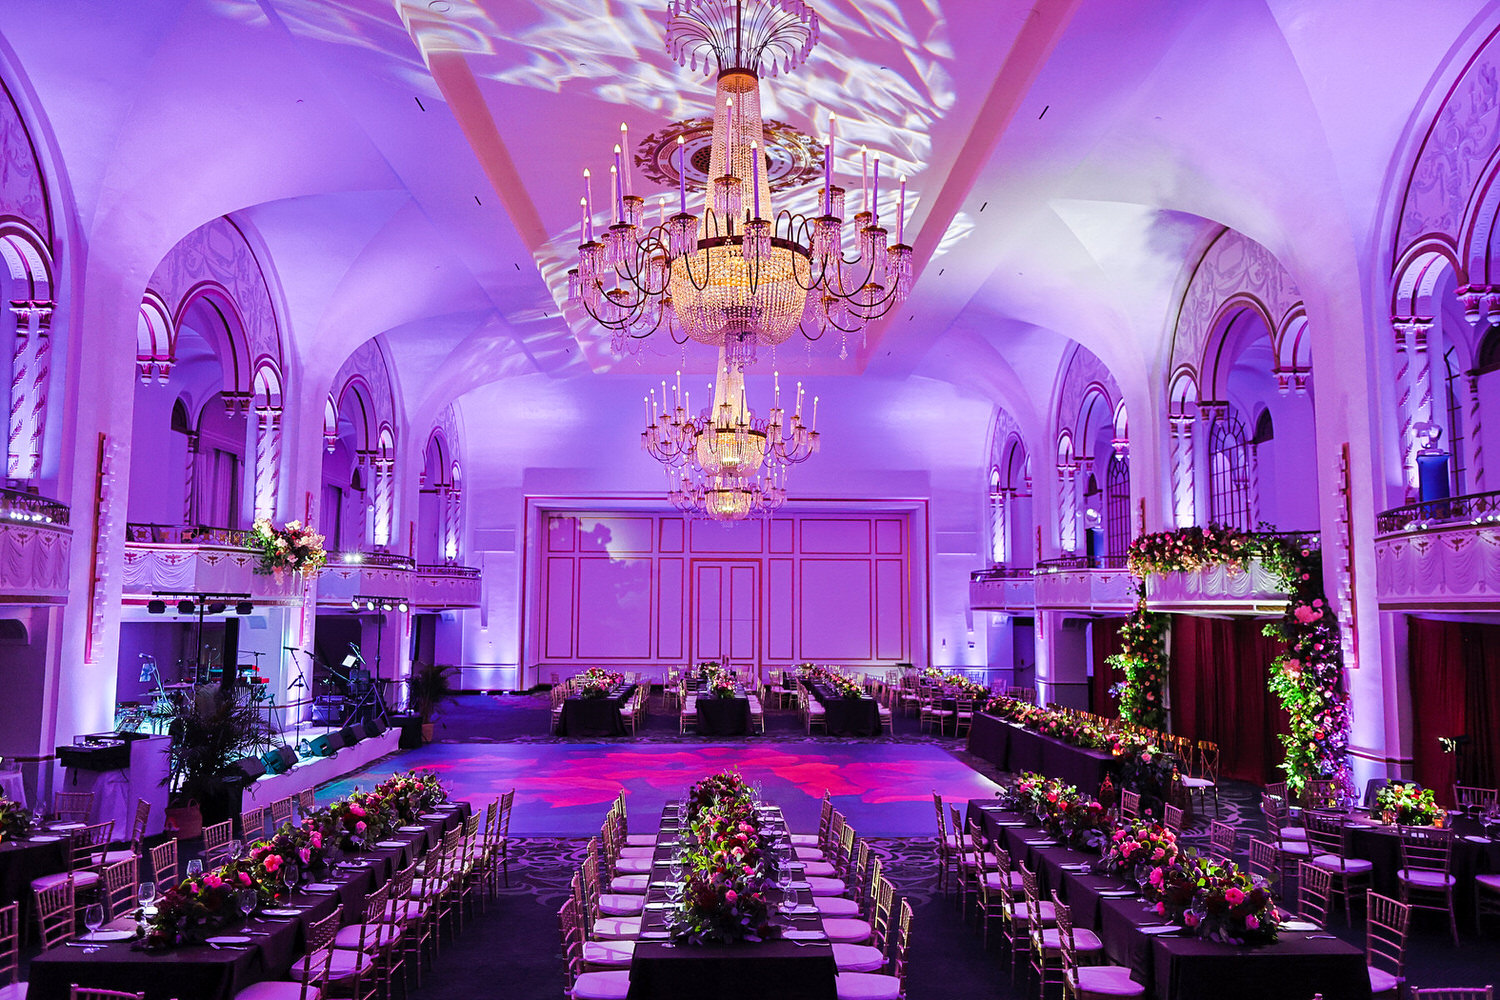 a banquet hall set up for a formal function.